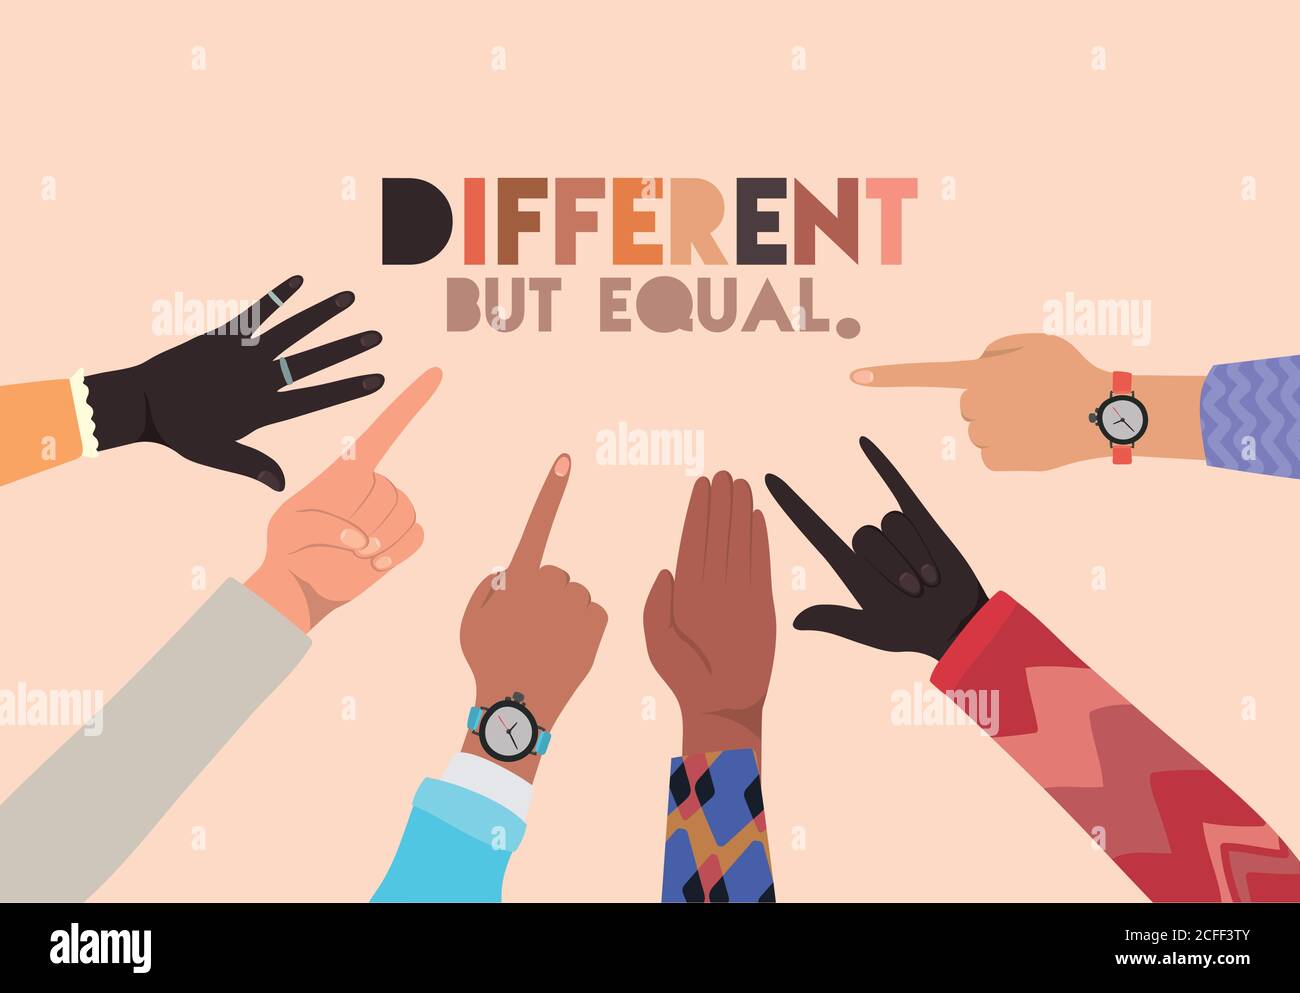 different but equal and diversity skin hands vector design Stock Vector